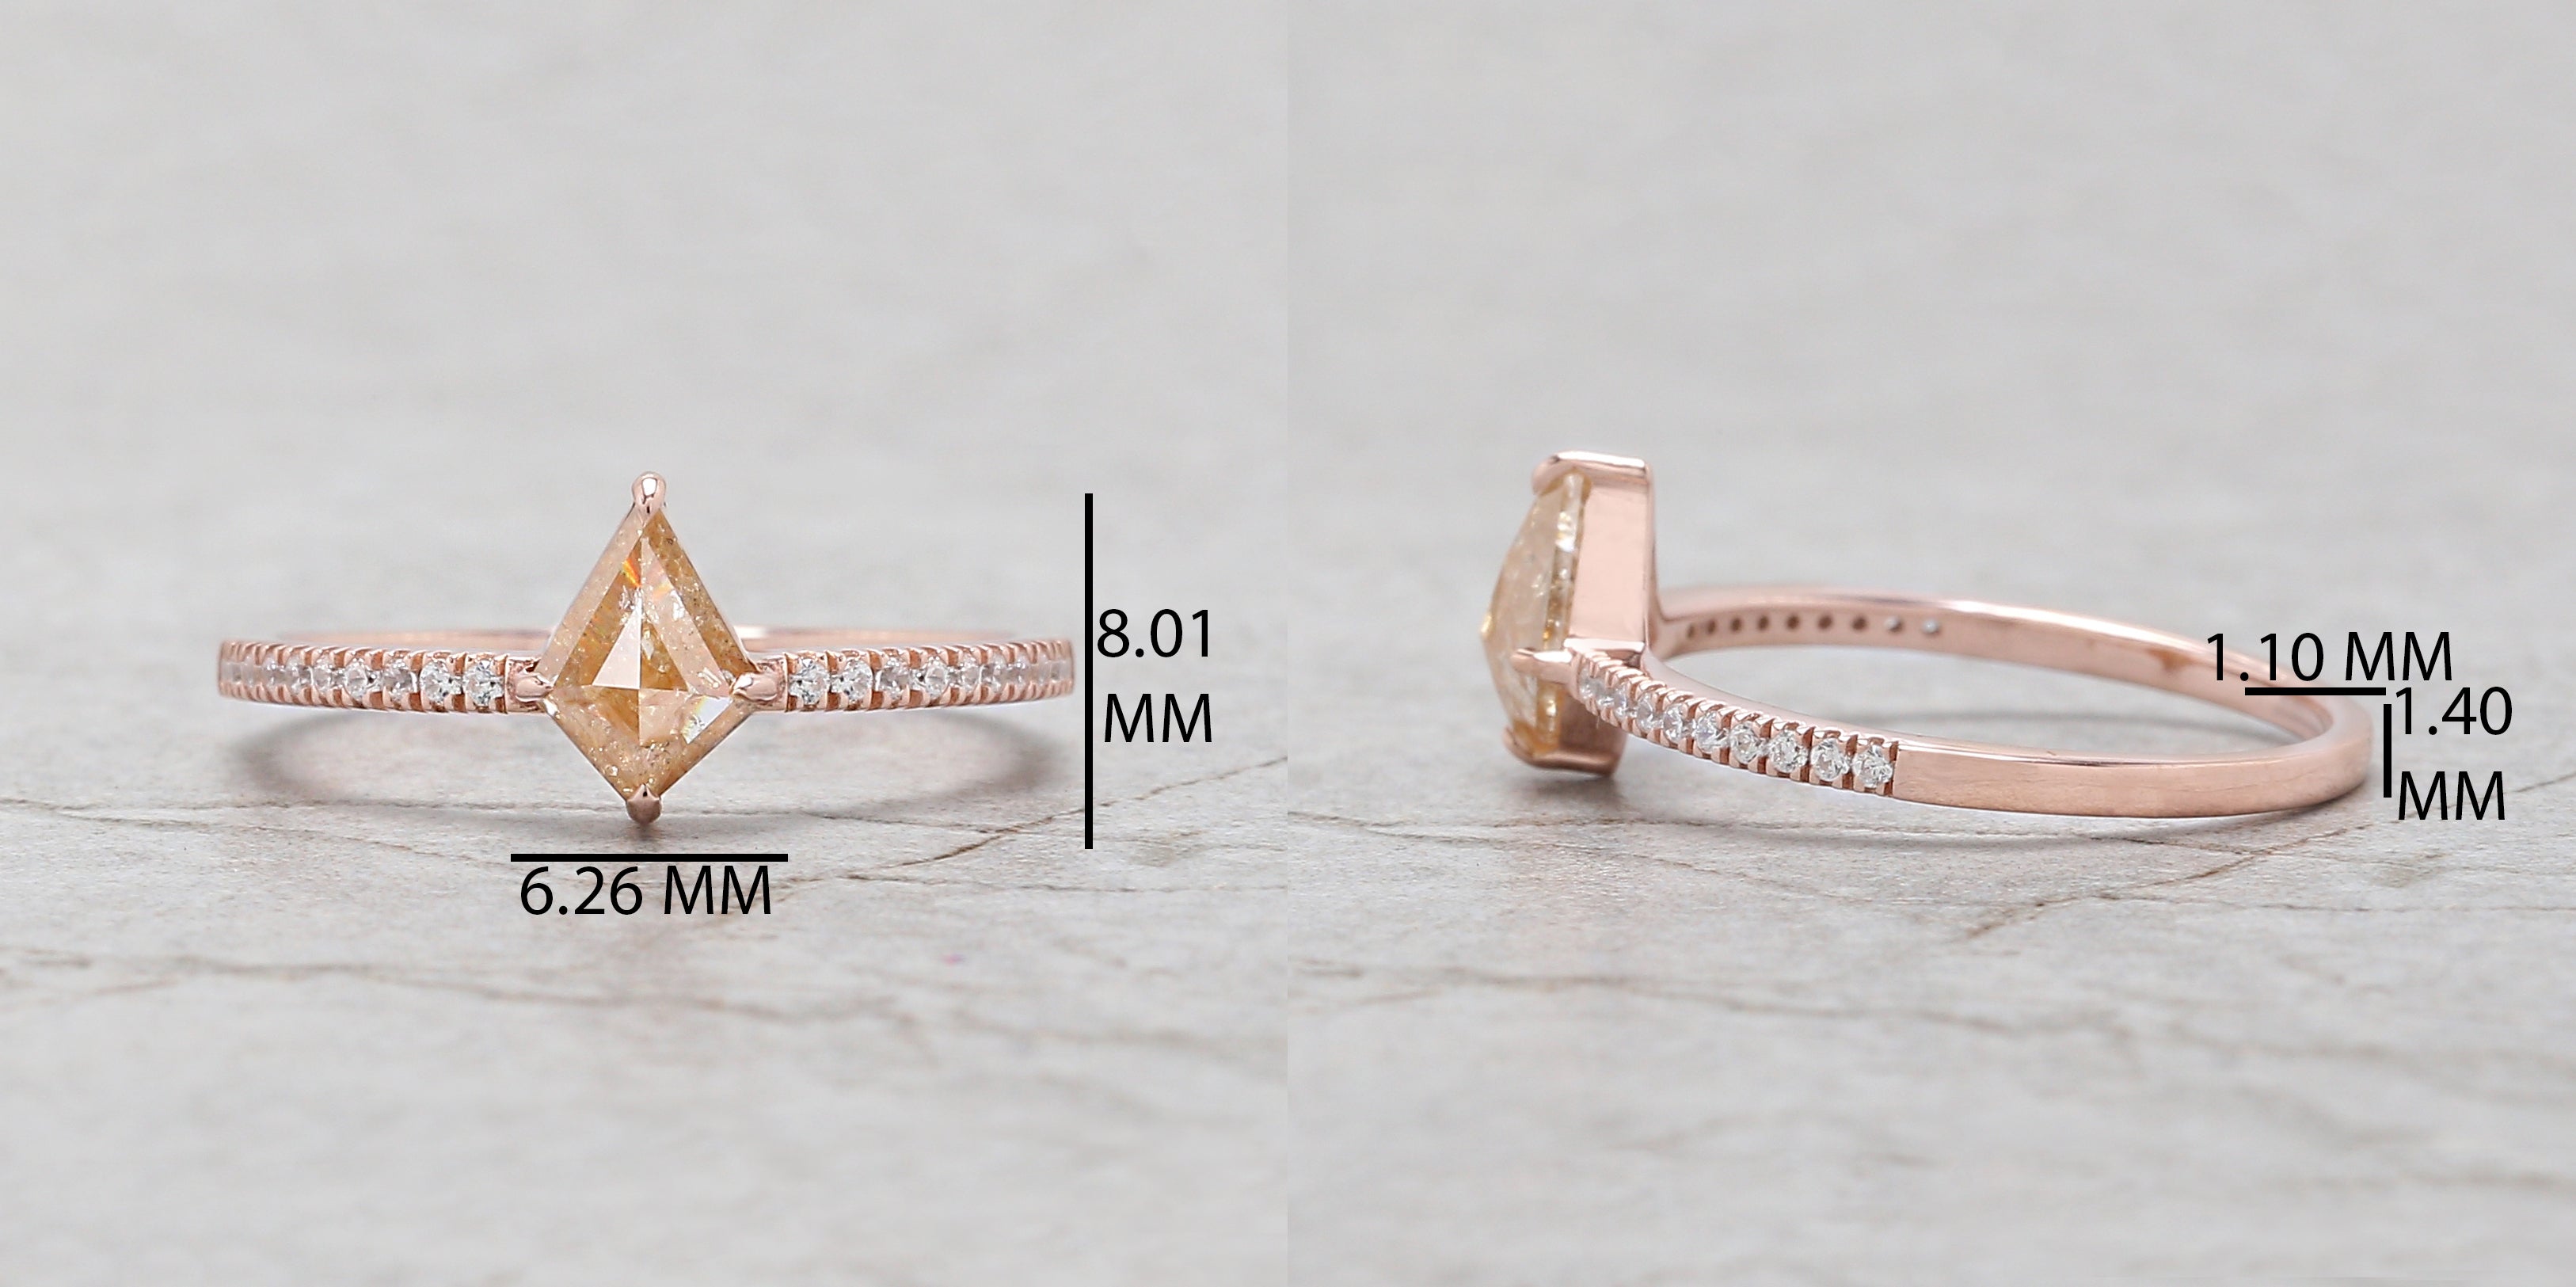 Kite Cut Brown Color Diamond Ring 0.58 Ct 7.43 MM Kite Shape Diamond Ring 14K Solid Rose Gold Silver Kite Engagement Ring Gift For Her QK2590